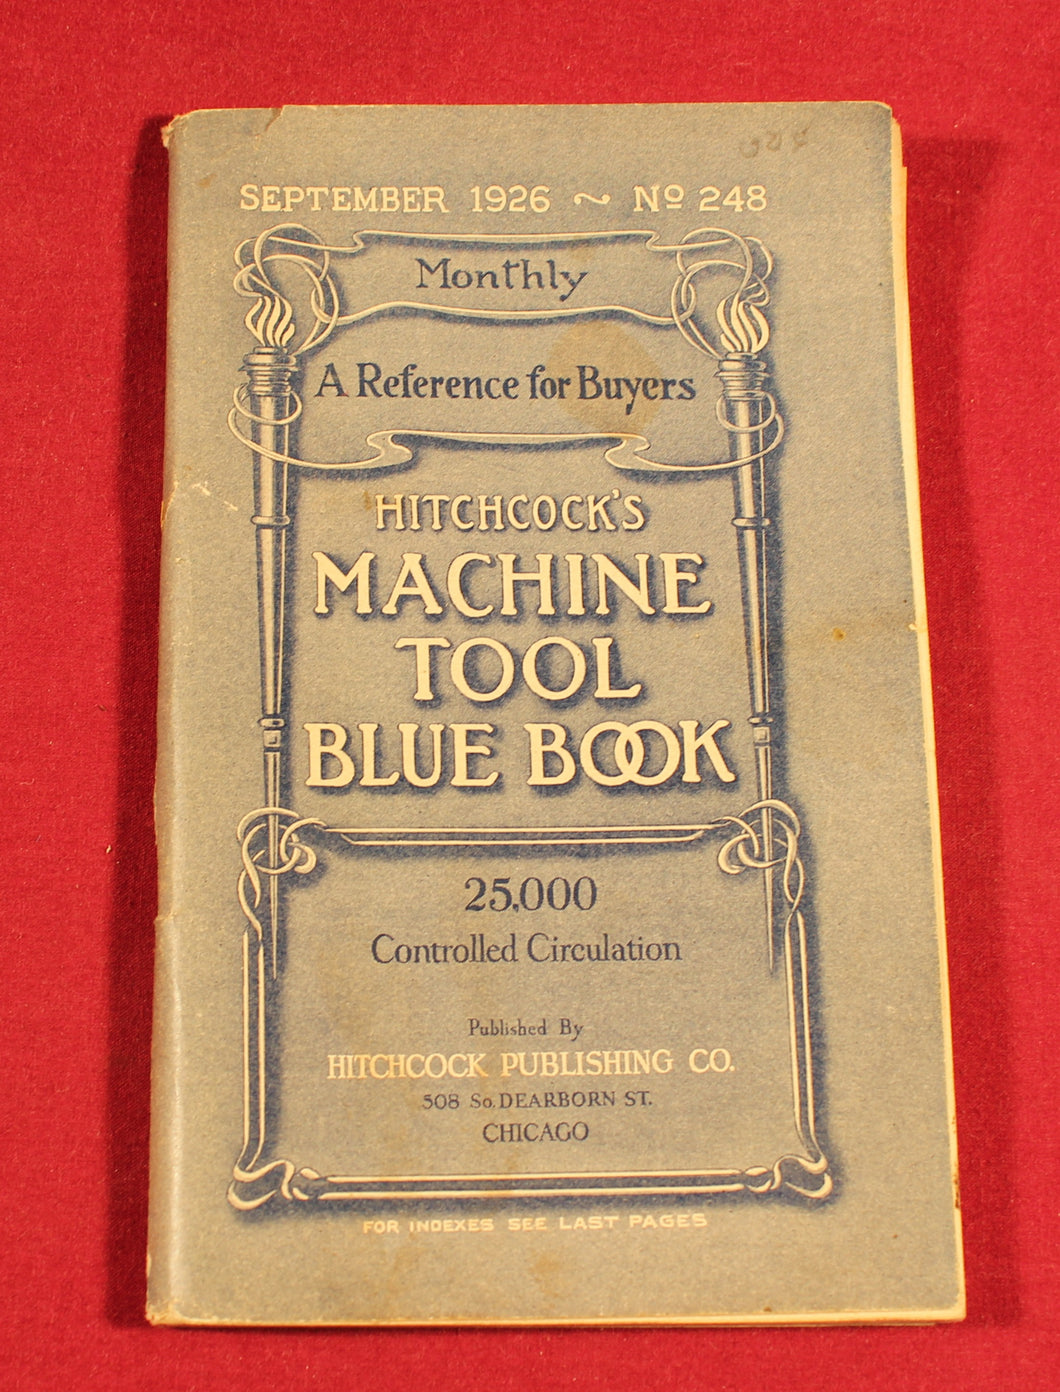 Vintage HITCHCOCK'S MACHINE TOOL BLUE BOOK IF ADVERTISING NOVEMBER 1926 No.248